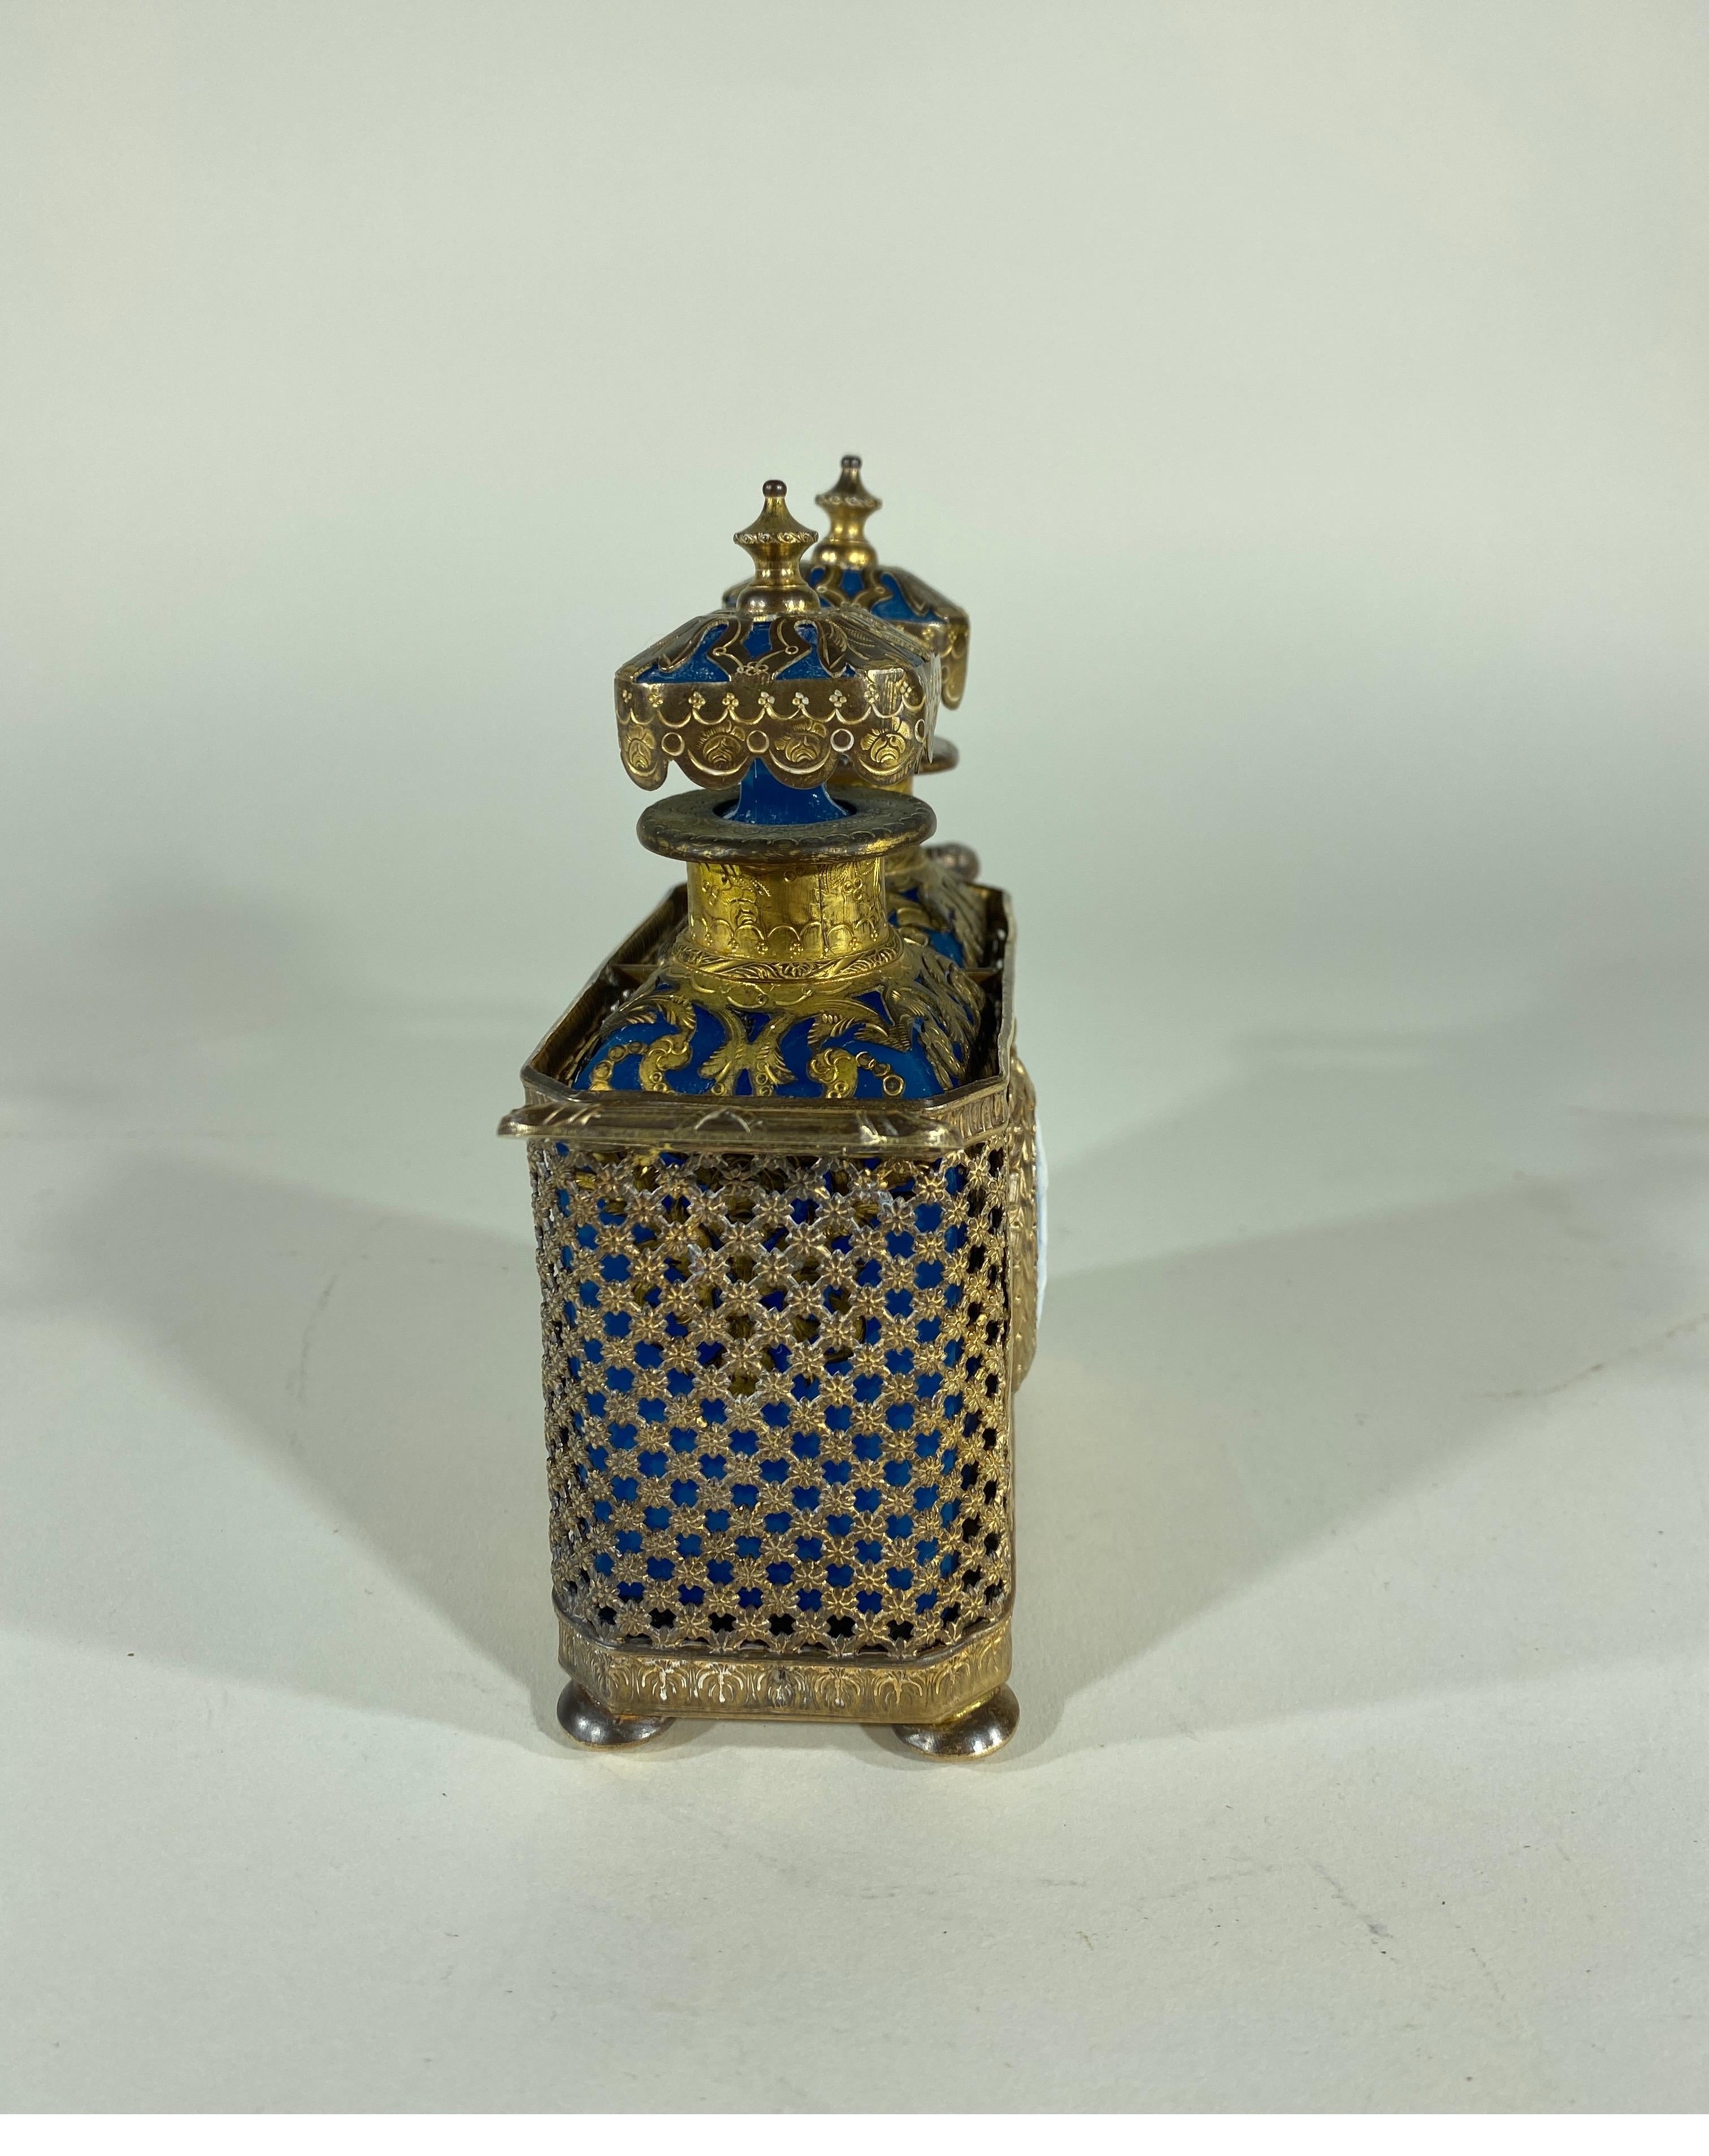 Pair of bronze mounted opaline perfume with stoppers in a perforated bronze caddy with a basalt medallion and classical decoration.